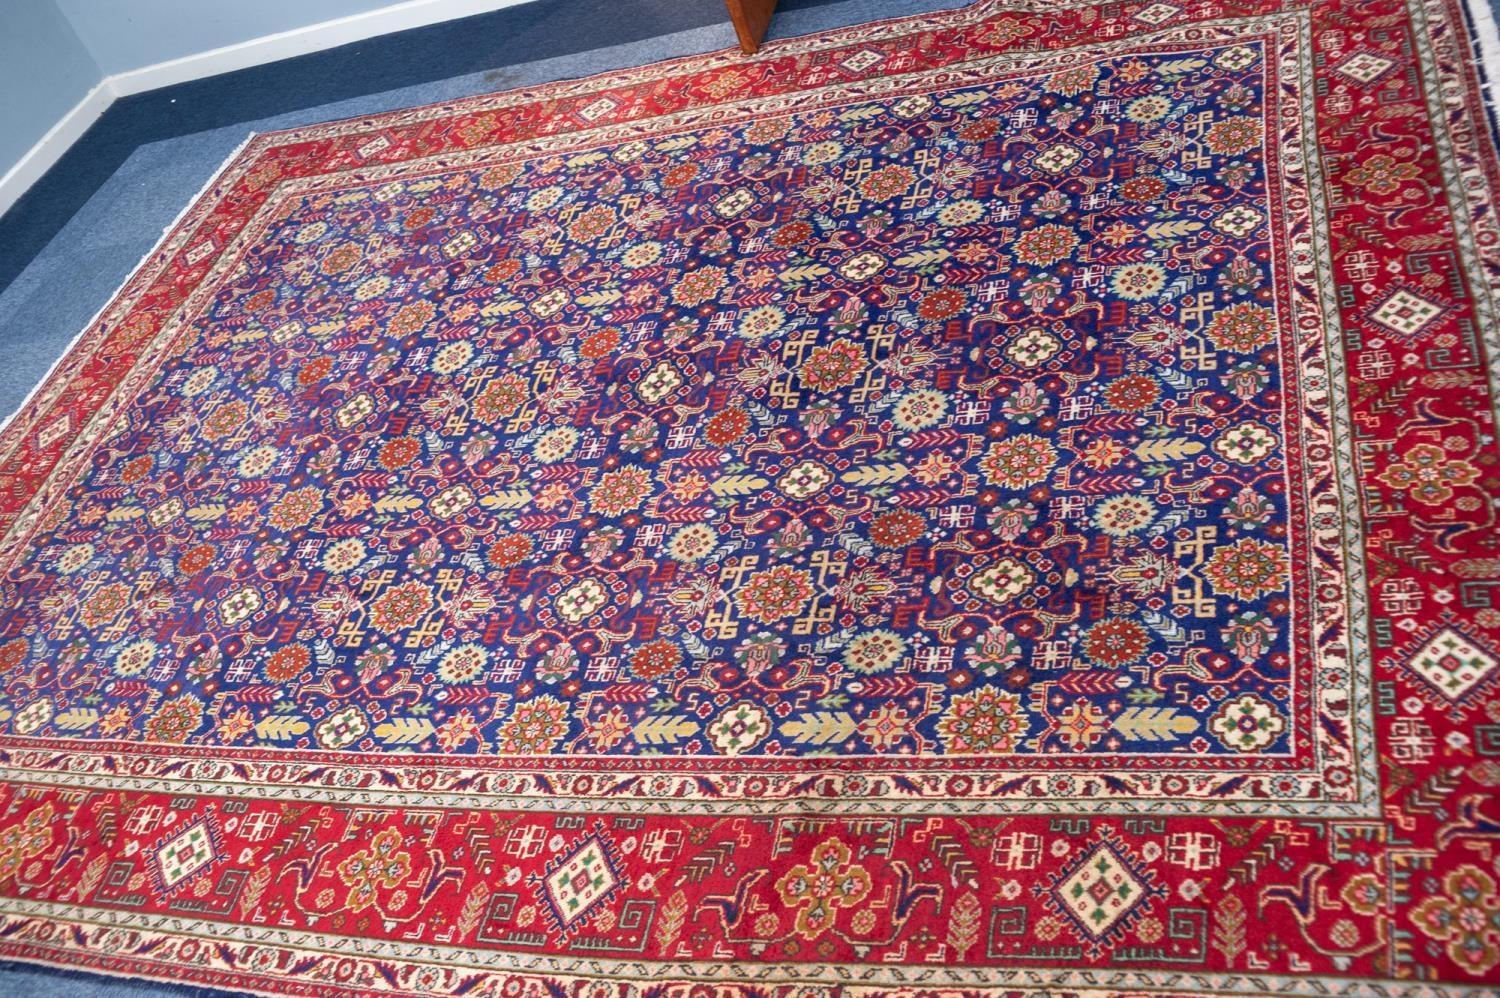 TABRIZ PERSIAN CARPET with all-over repeat formal floral, leaf and ram's horn patetrn on a dark blue